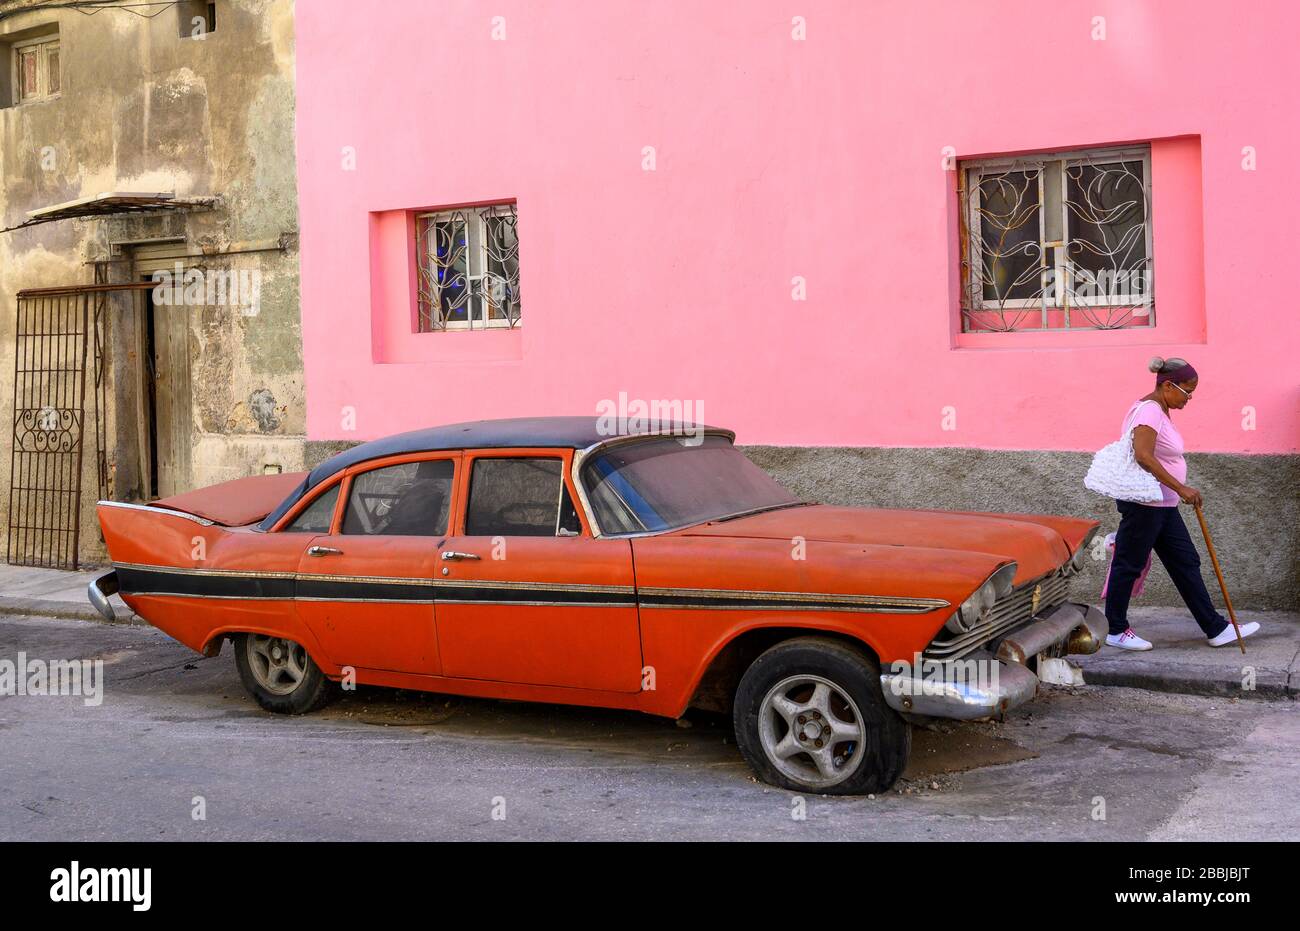 Pink wall with old red american fifties car, Centro, Havana, Cuba Stock Photo